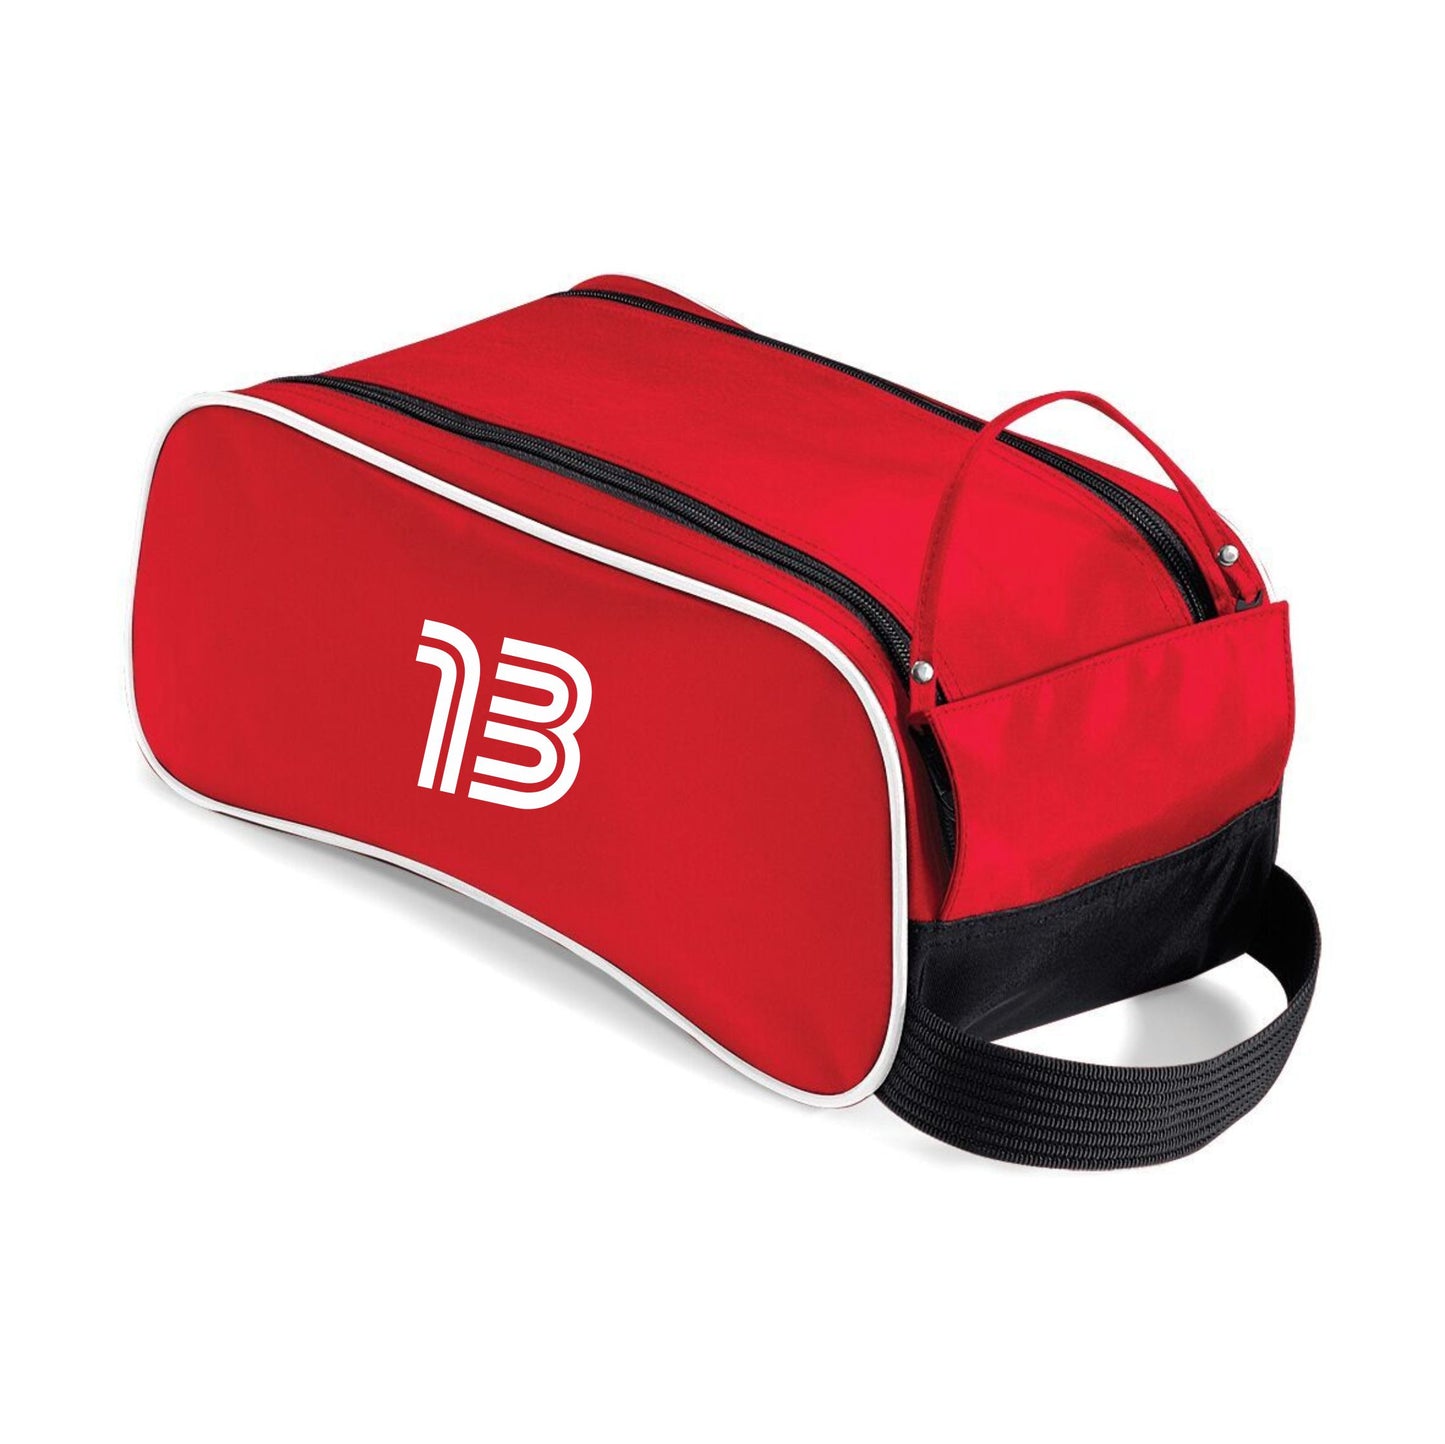 PS Olympic Boot Bag (Red)